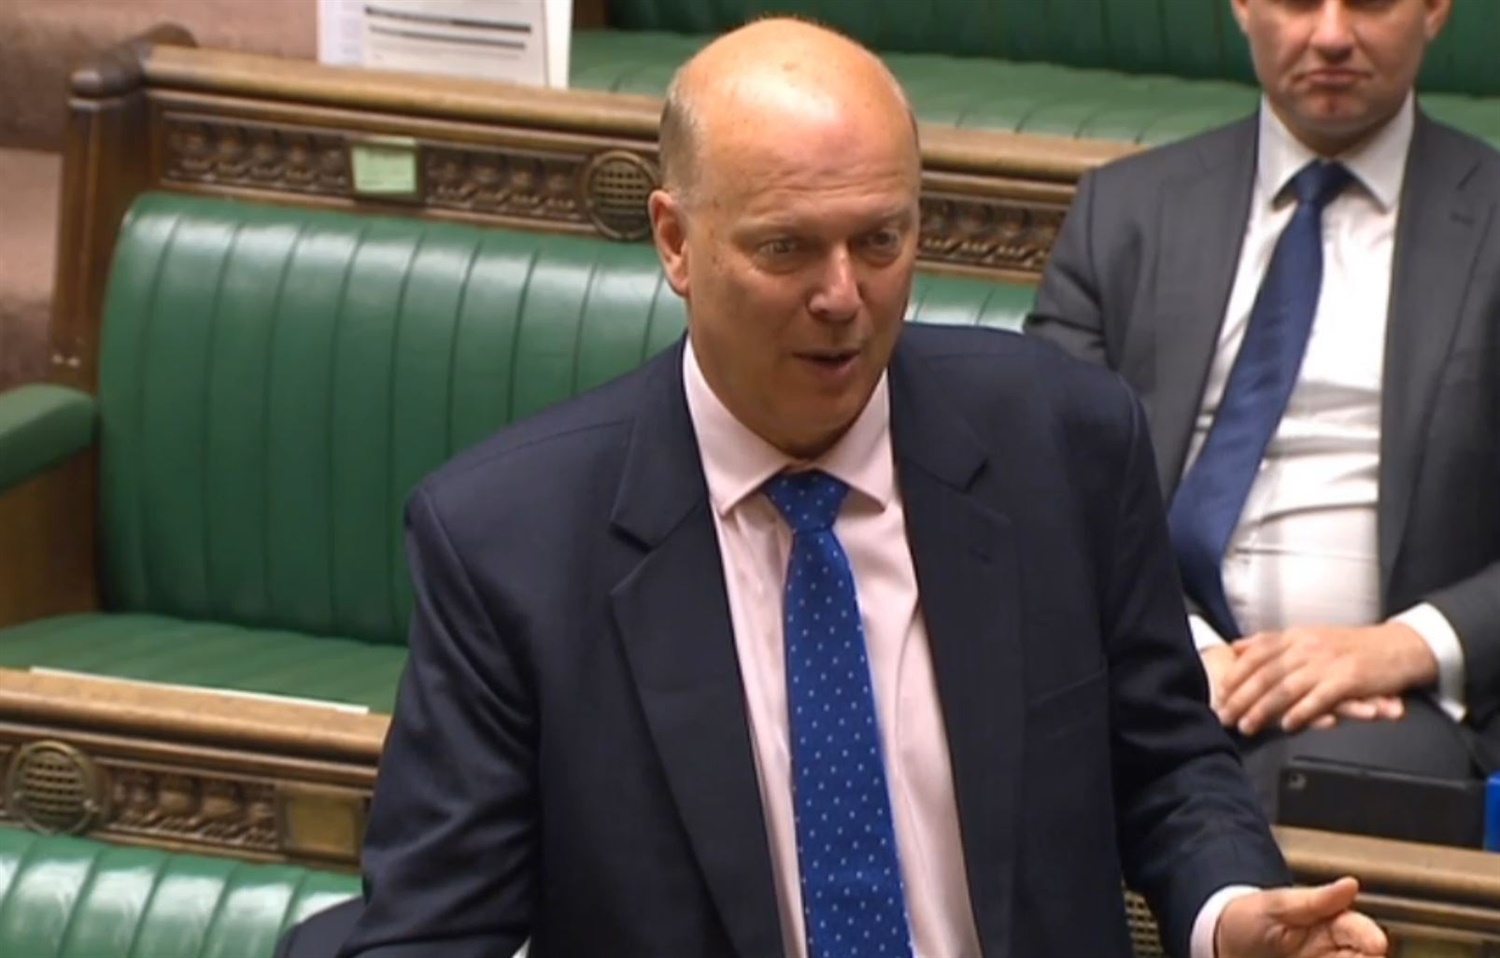 Grayling speech: inquiry launched, passengers to receive compensation